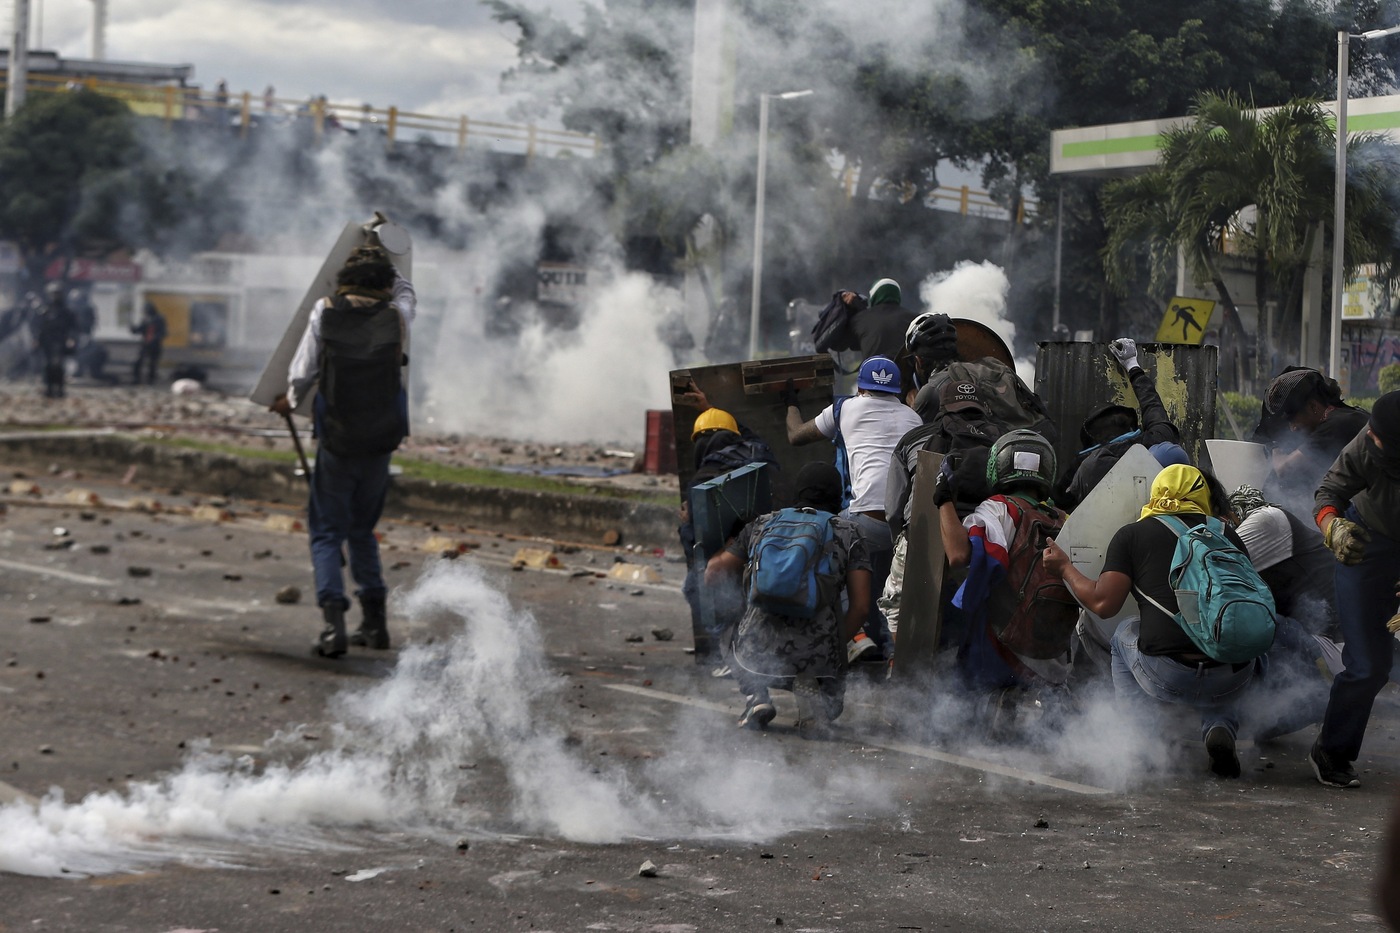 Protesters protect themselves with makeshift shields as they clash with the police during a national strike against tax reform in Cali, Colombia, Monday, May 3, 2021. Colombia's President Ivan Duque withdrew the government-proposed tax reform on Sunday. (AP Photo/Andres Gonzalez)